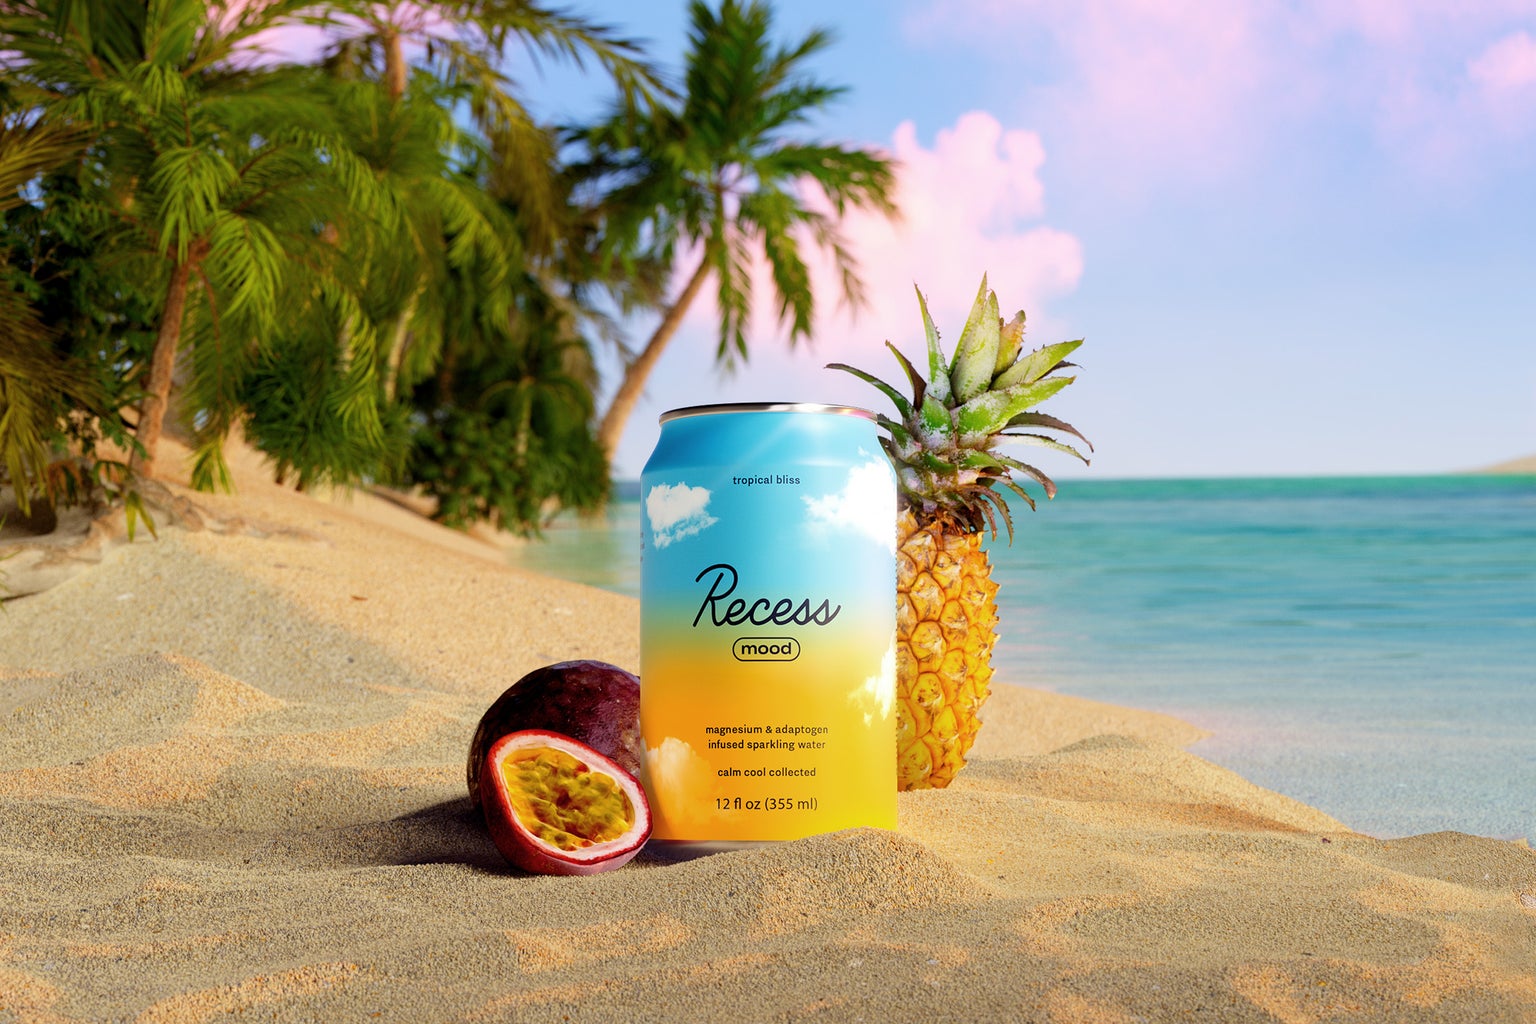 recess tropical bliss mood product?width=1024&height=1024&fit=cover&auto=webp